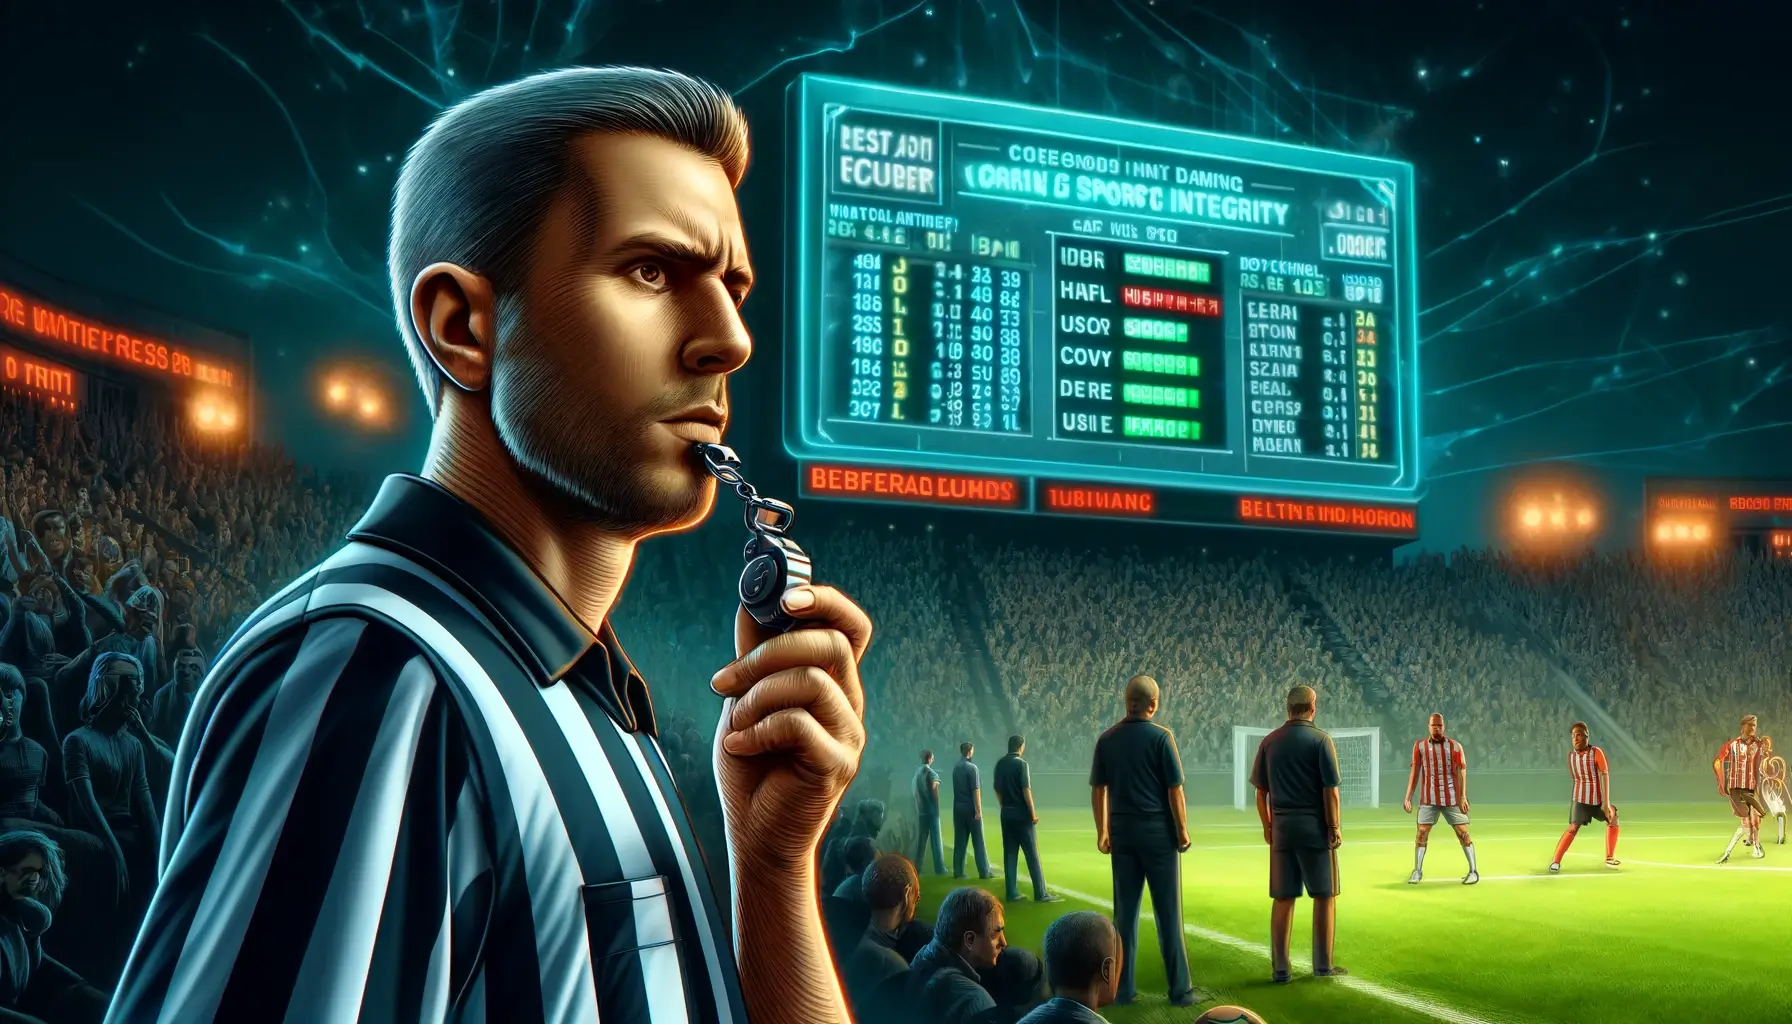 A detailed digital illustration of a referee overseeing a sports match, holding a whistle while looking concerned. In the background, a scoreboard displays fluctuating betting odds, and spectators watch intently. 